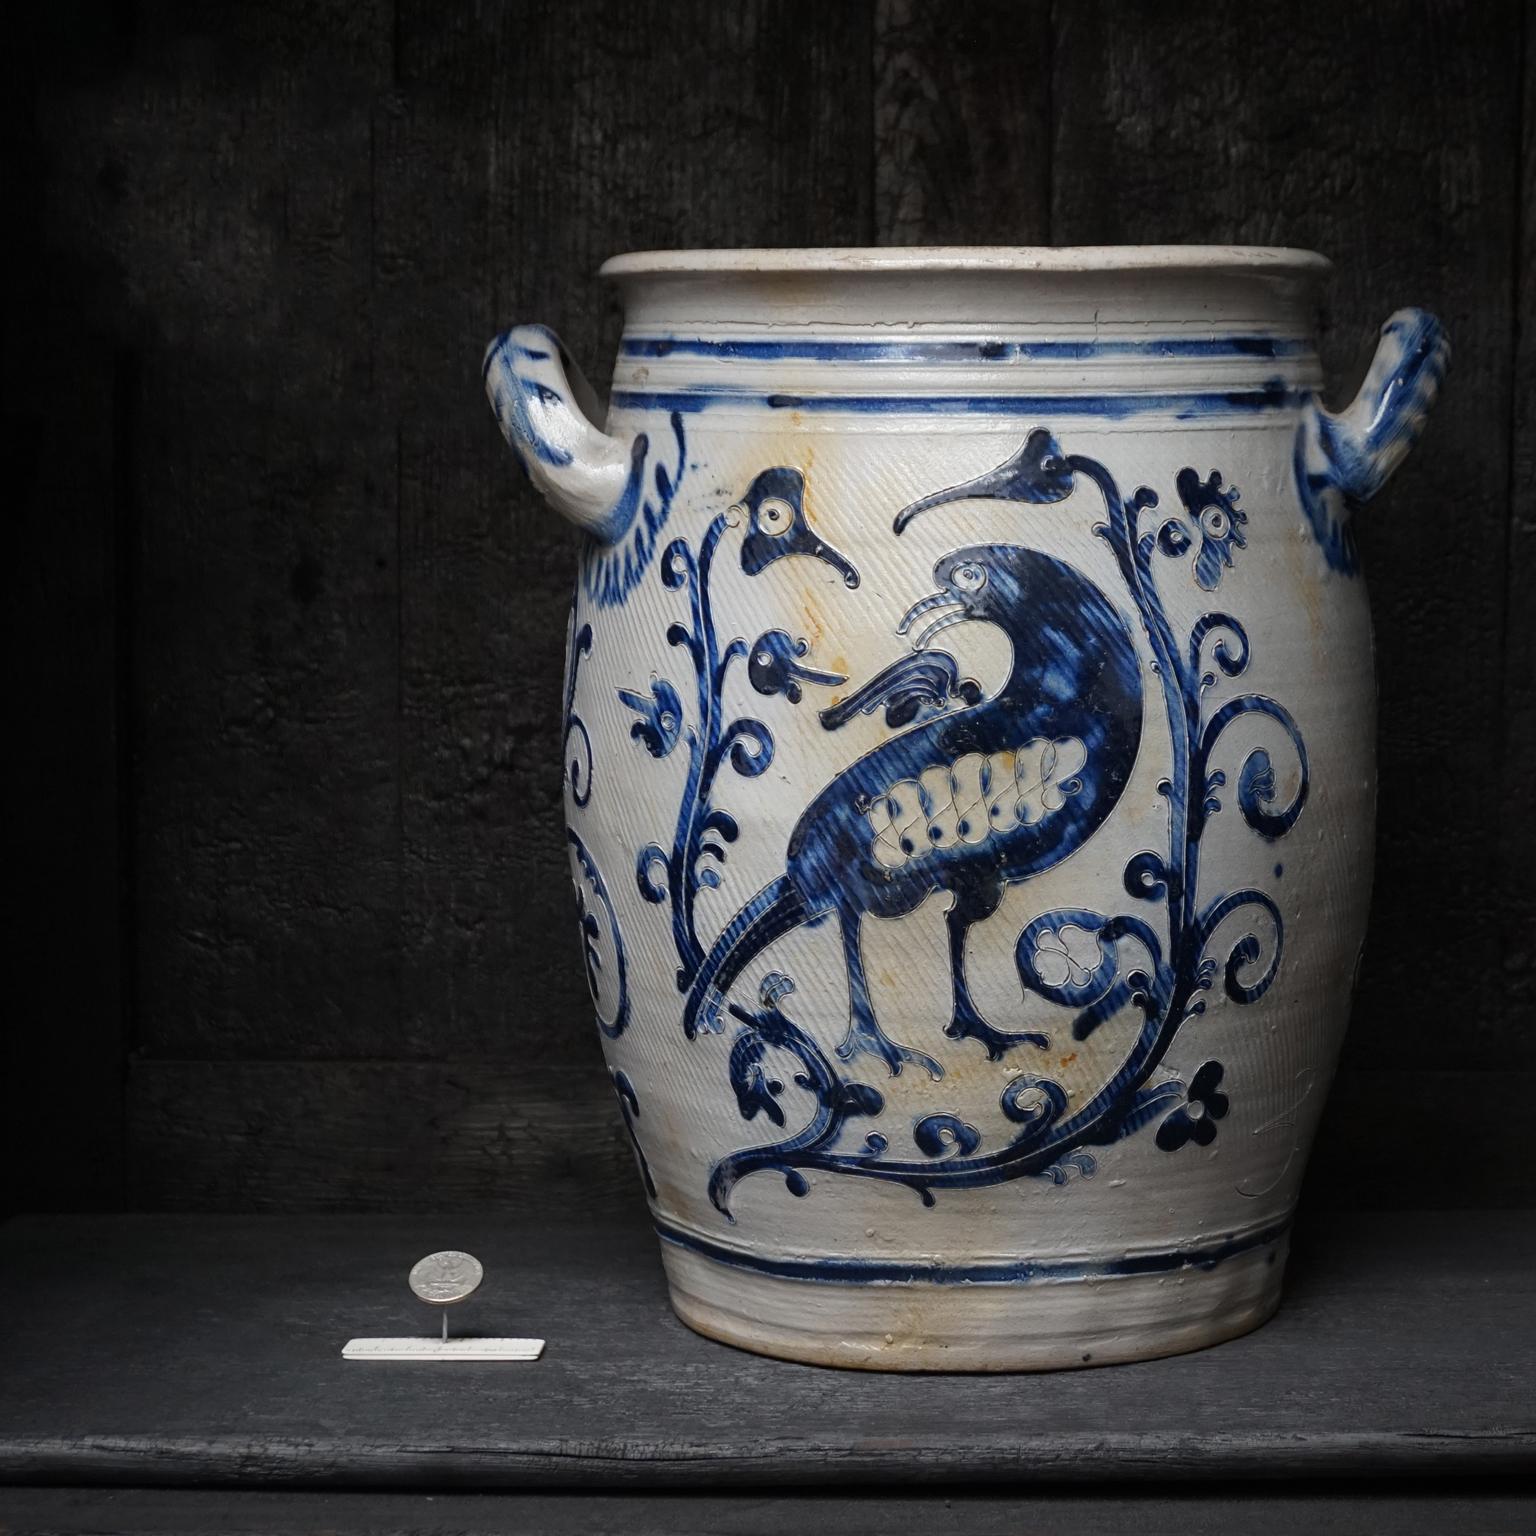 Large three gallon Westerwald crock pot, open salt glazed two-handled stoneware jar.
Decorated with elaborate bird decoration, great collectors’ items.

The ovoid shaped jar with loop handles is decorated on the front and back with Ritzdekor and